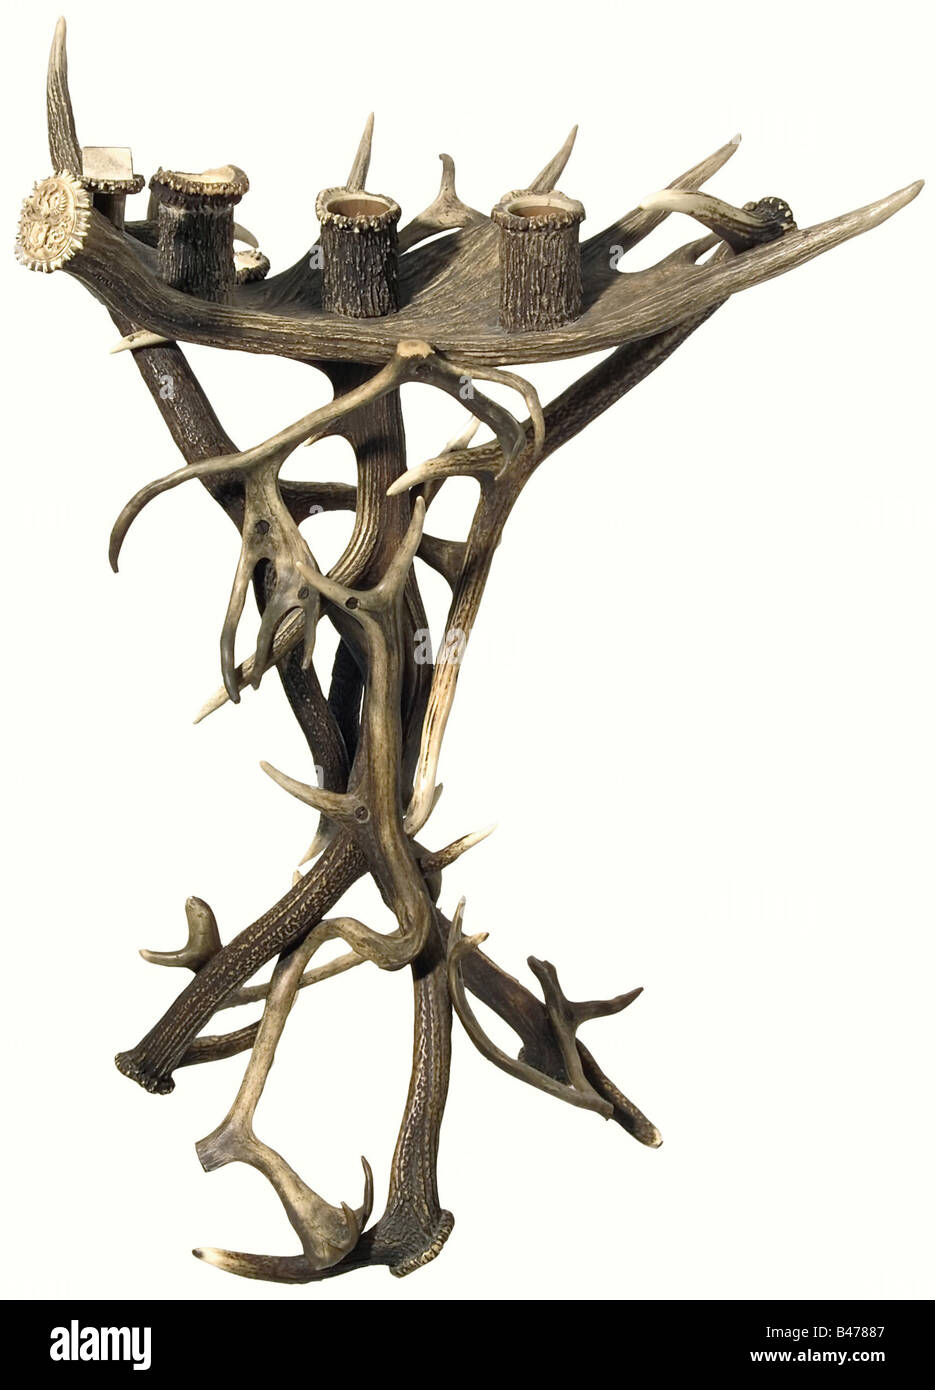 Hermann Göring - a hunter's smoking table., Three wood-lined, horn containers for cigars, cigarillos, cigarettes, and matches mounted on a massive palmate section of fallow deer antler crowning magnificent red stag antlers screwed together. One piece of antler serves as an ashtray, and the rosette bears the Göring family coat of arms. Height 94 cm. Width 64 cm. Cf. the hunter's barometer set into the palmate section of a fallow deer antler. Hermann Historica Auction 48, 22/23 April 2005, lot 7421, and the silver trophy goblet with fallow deer trophy, Schorfheid, Stock Photo